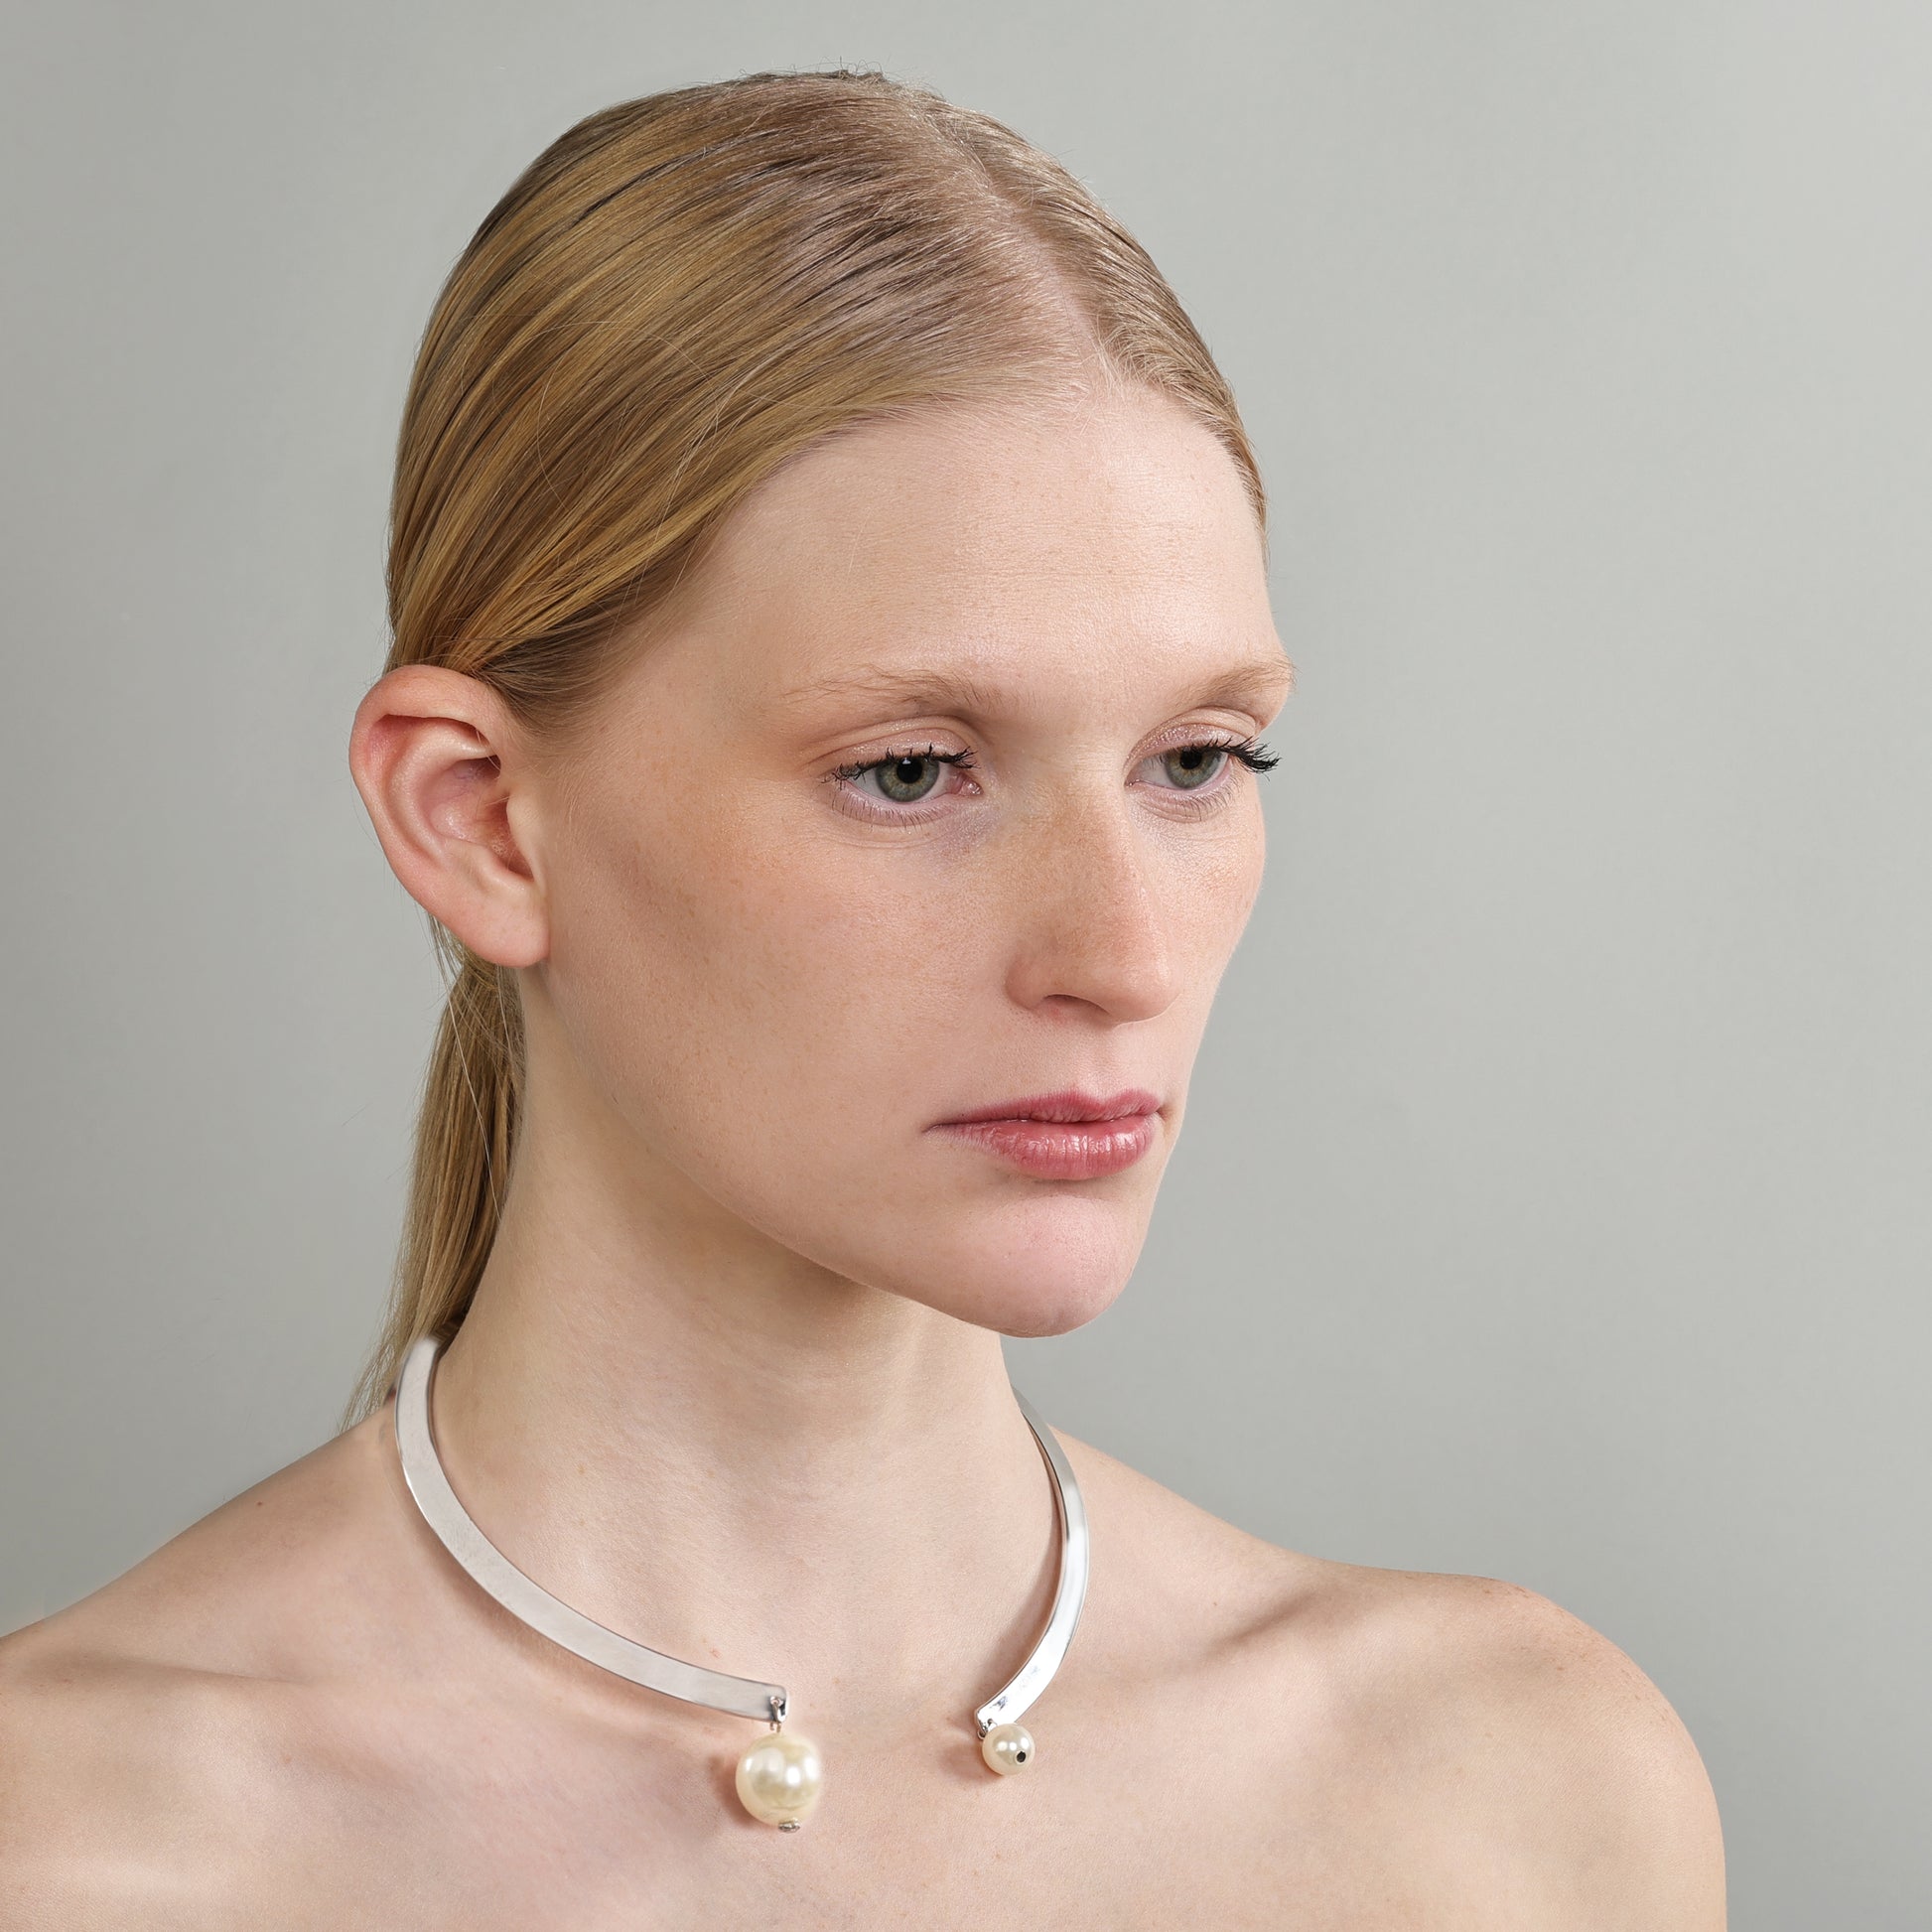 The pearls bring a classic and feminine charm.